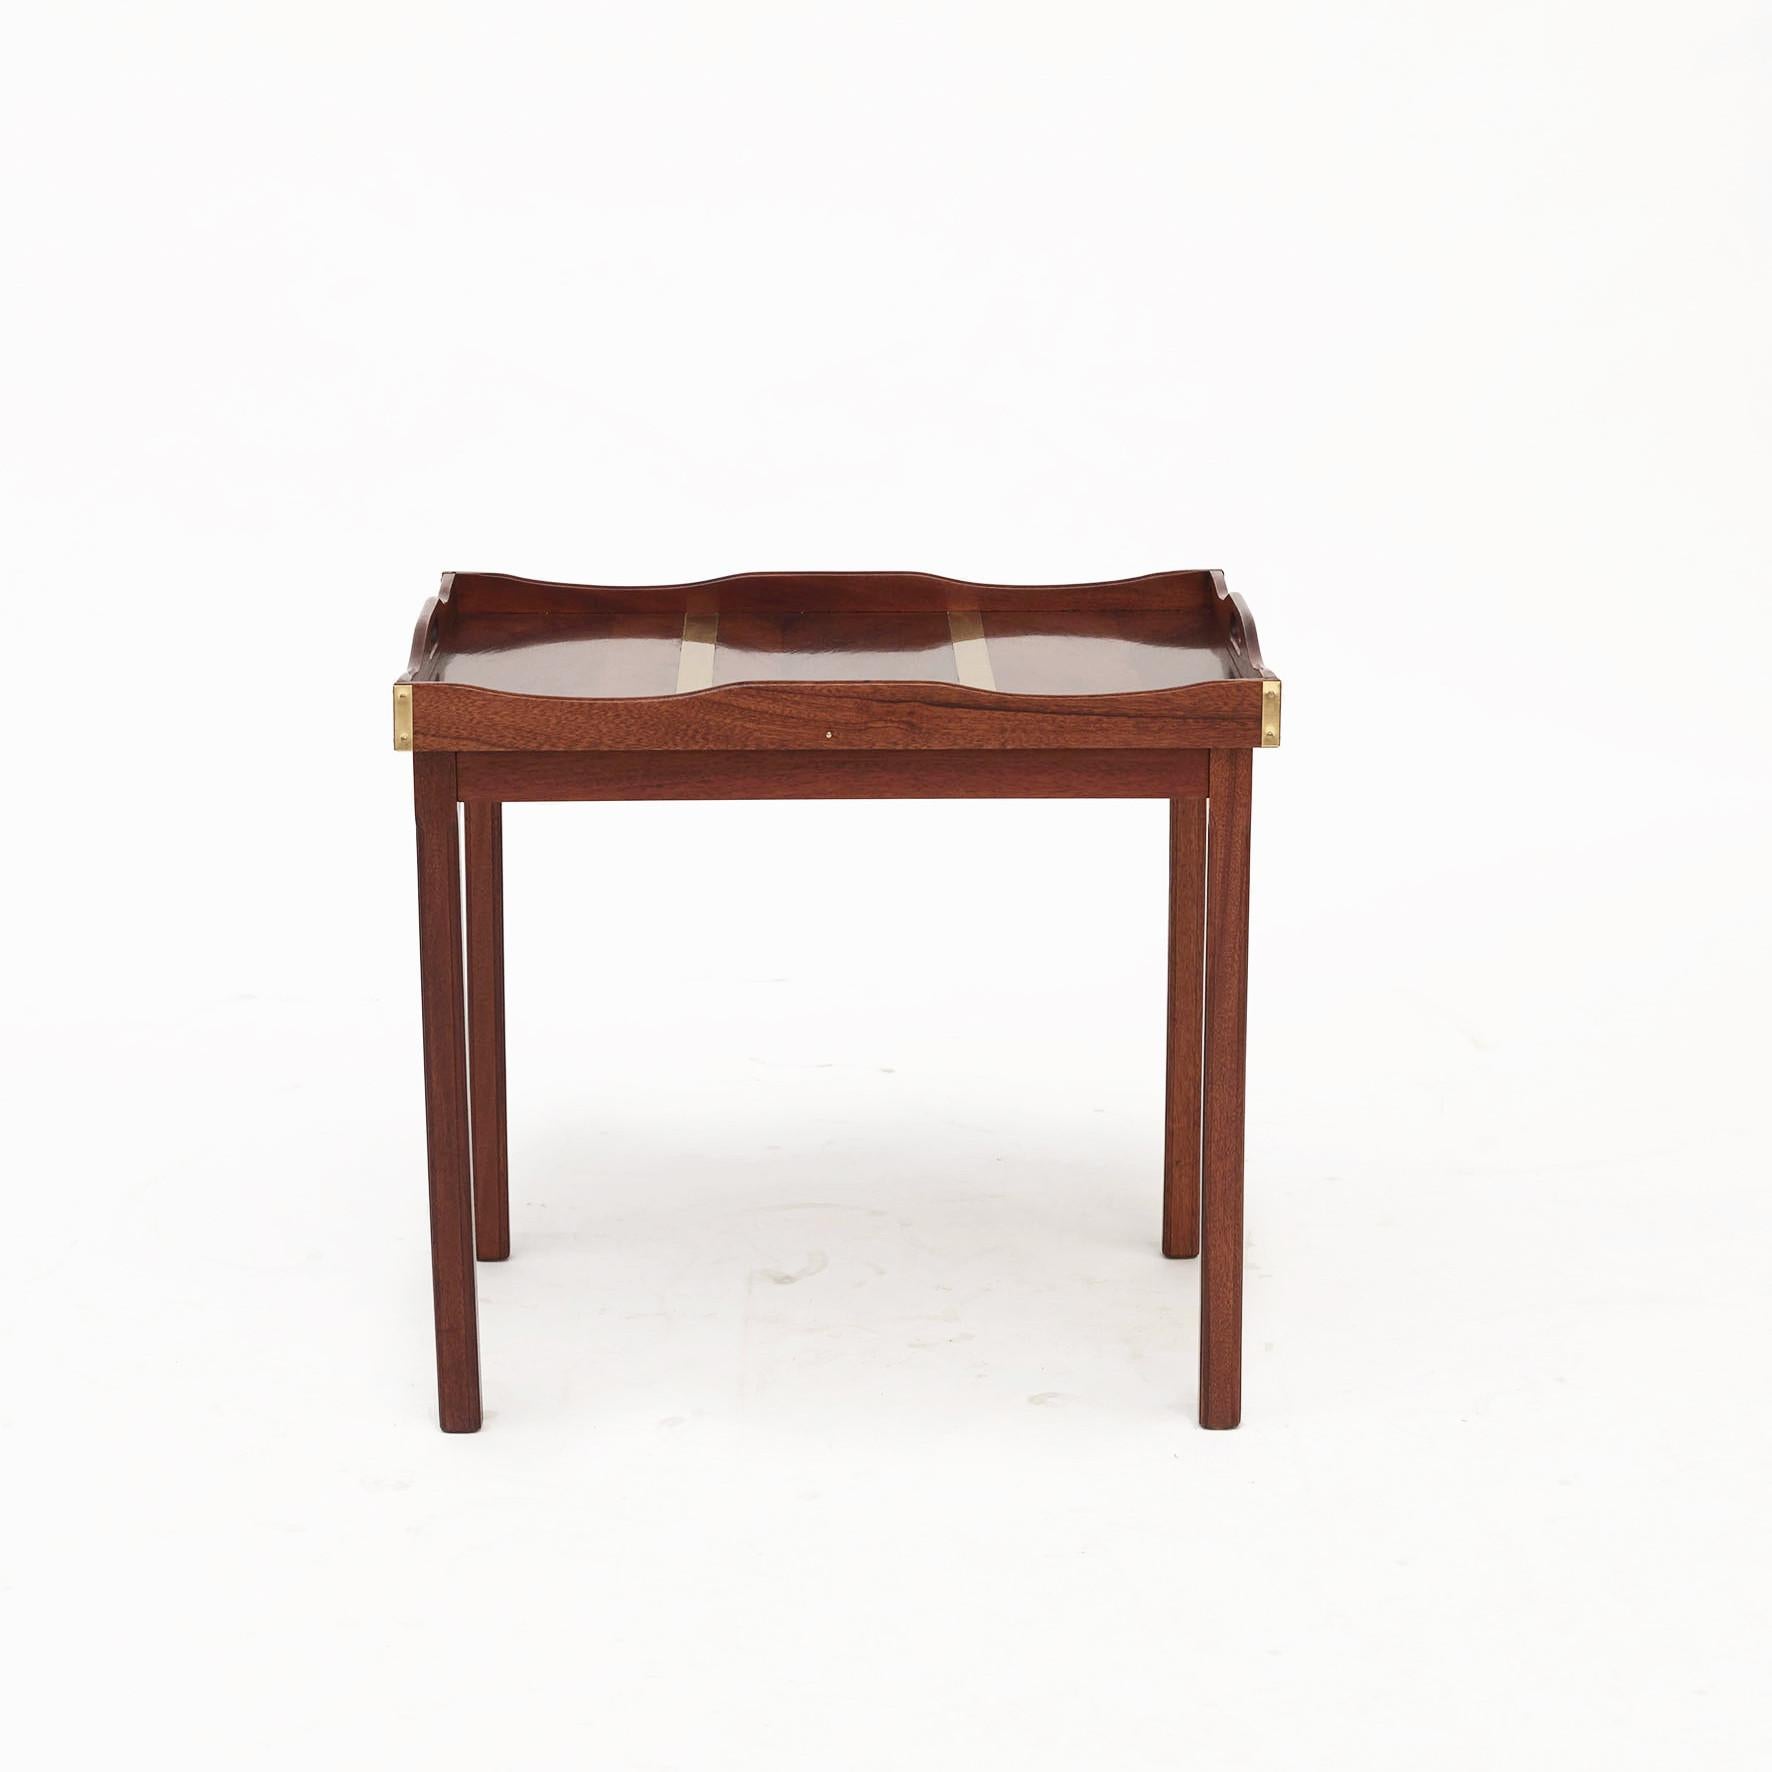 Elegant English tray table in solid mahogany with brass on corners and table top.
Regency style,
England approx. 1950.